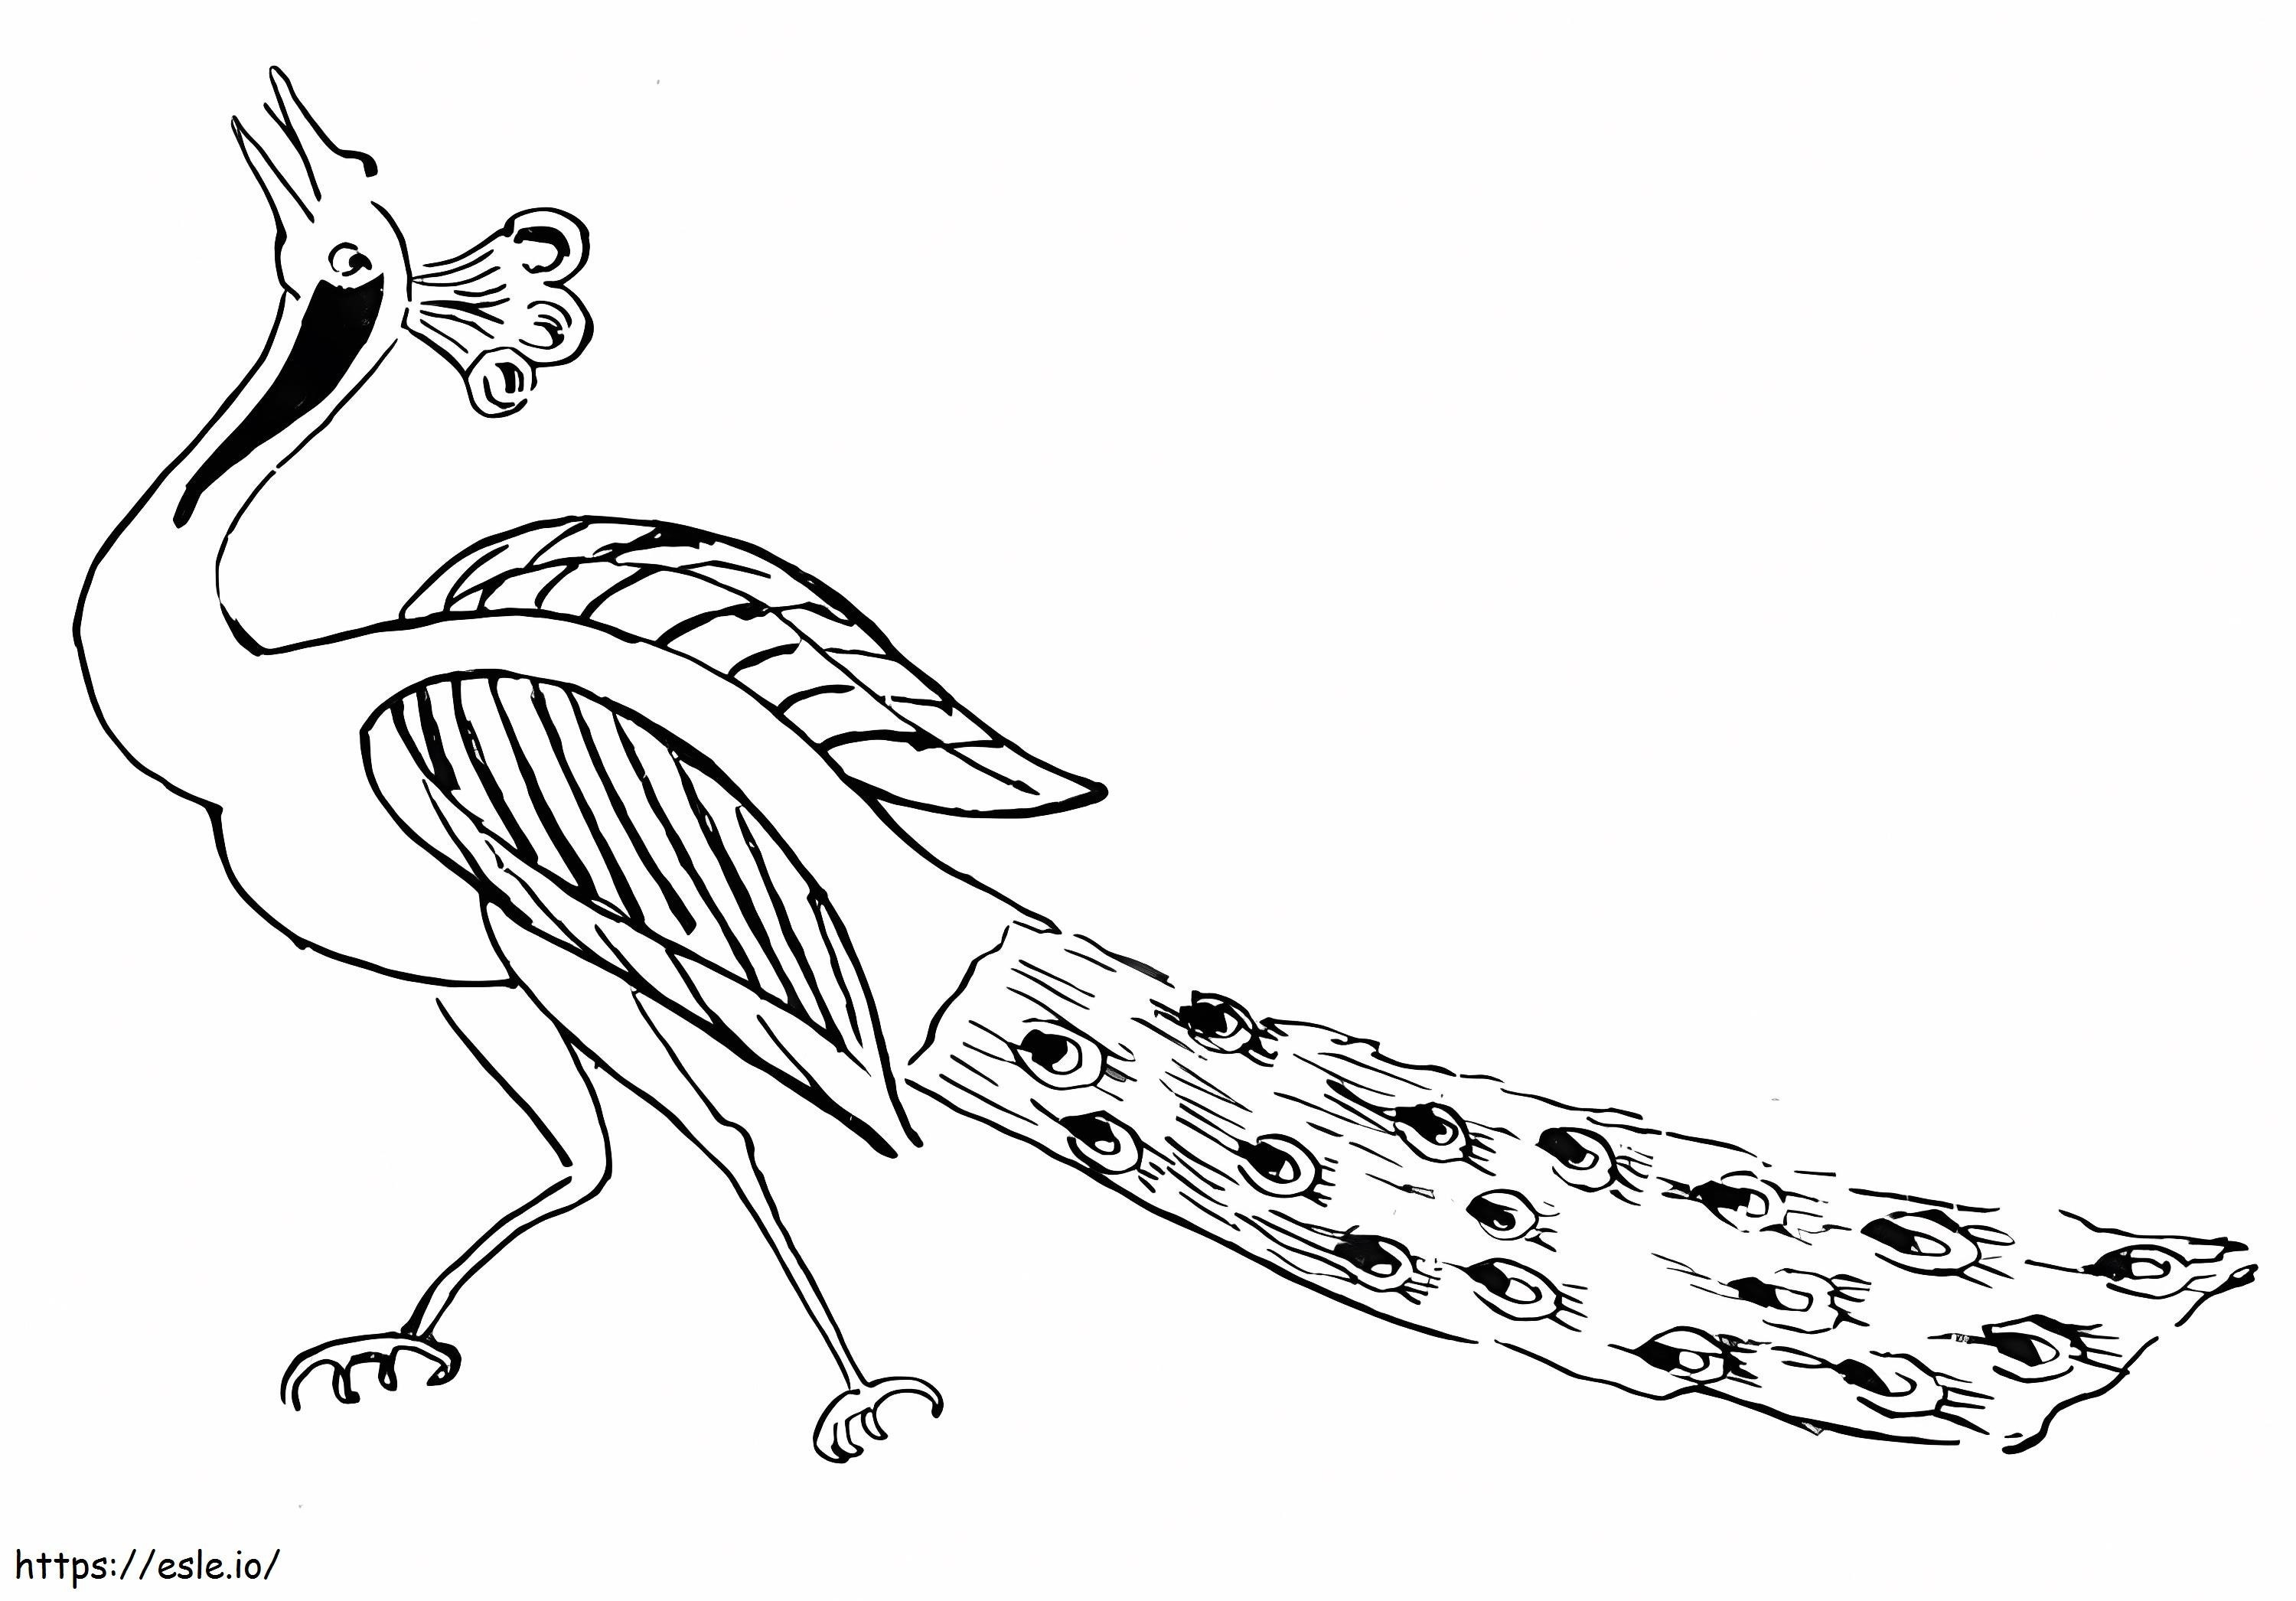 Peacock Printable coloring page